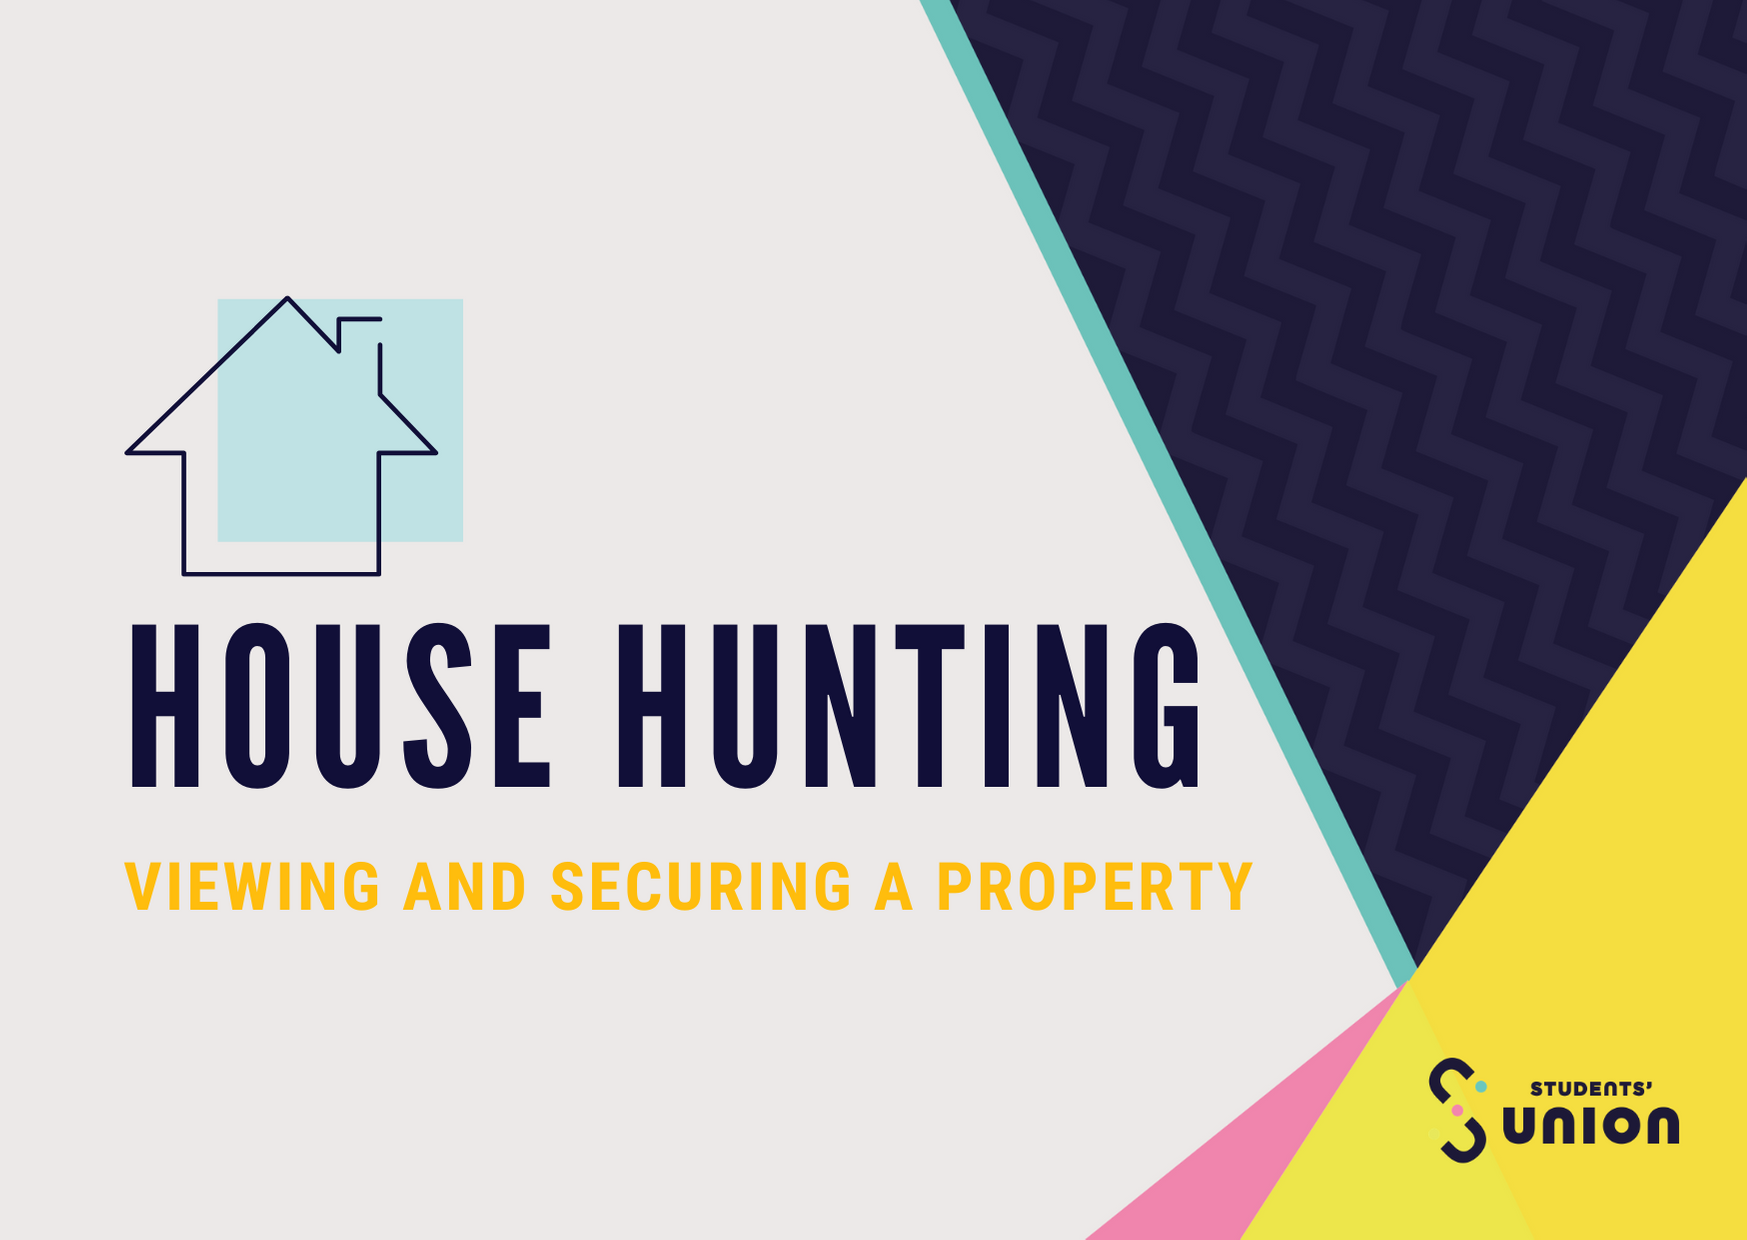 House Hunting Guide: Viewing and Securing a Property